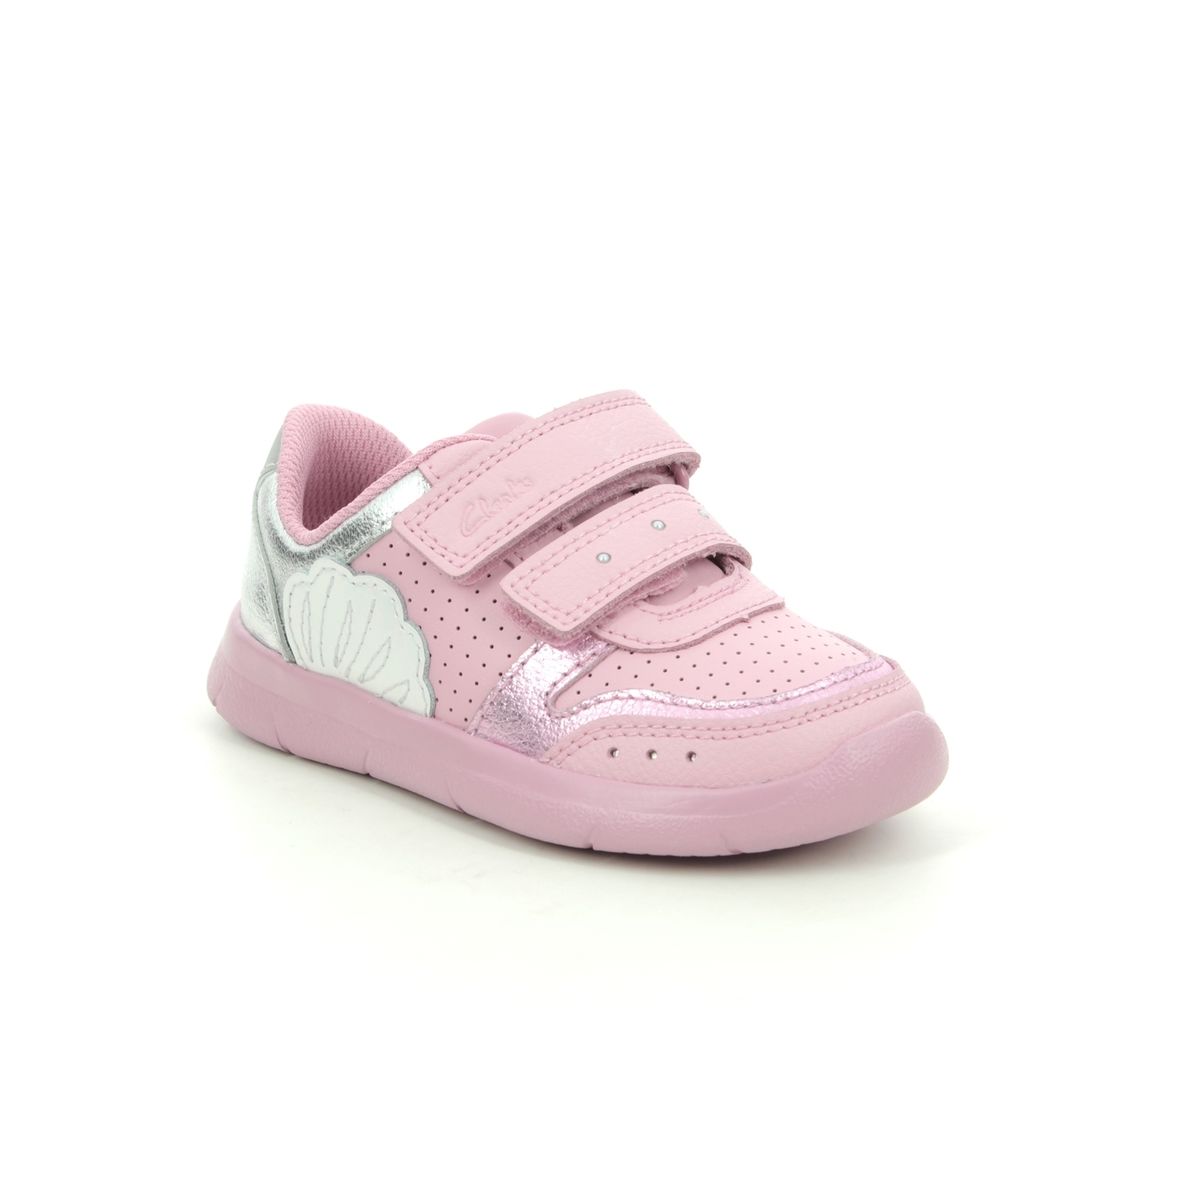 Clarks Ath Shell T Pink Leather Kids Toddler Girls Trainers 588096F In Size 8.5 In Plain Pink Leather F Width Fitting Regular Fit For kids